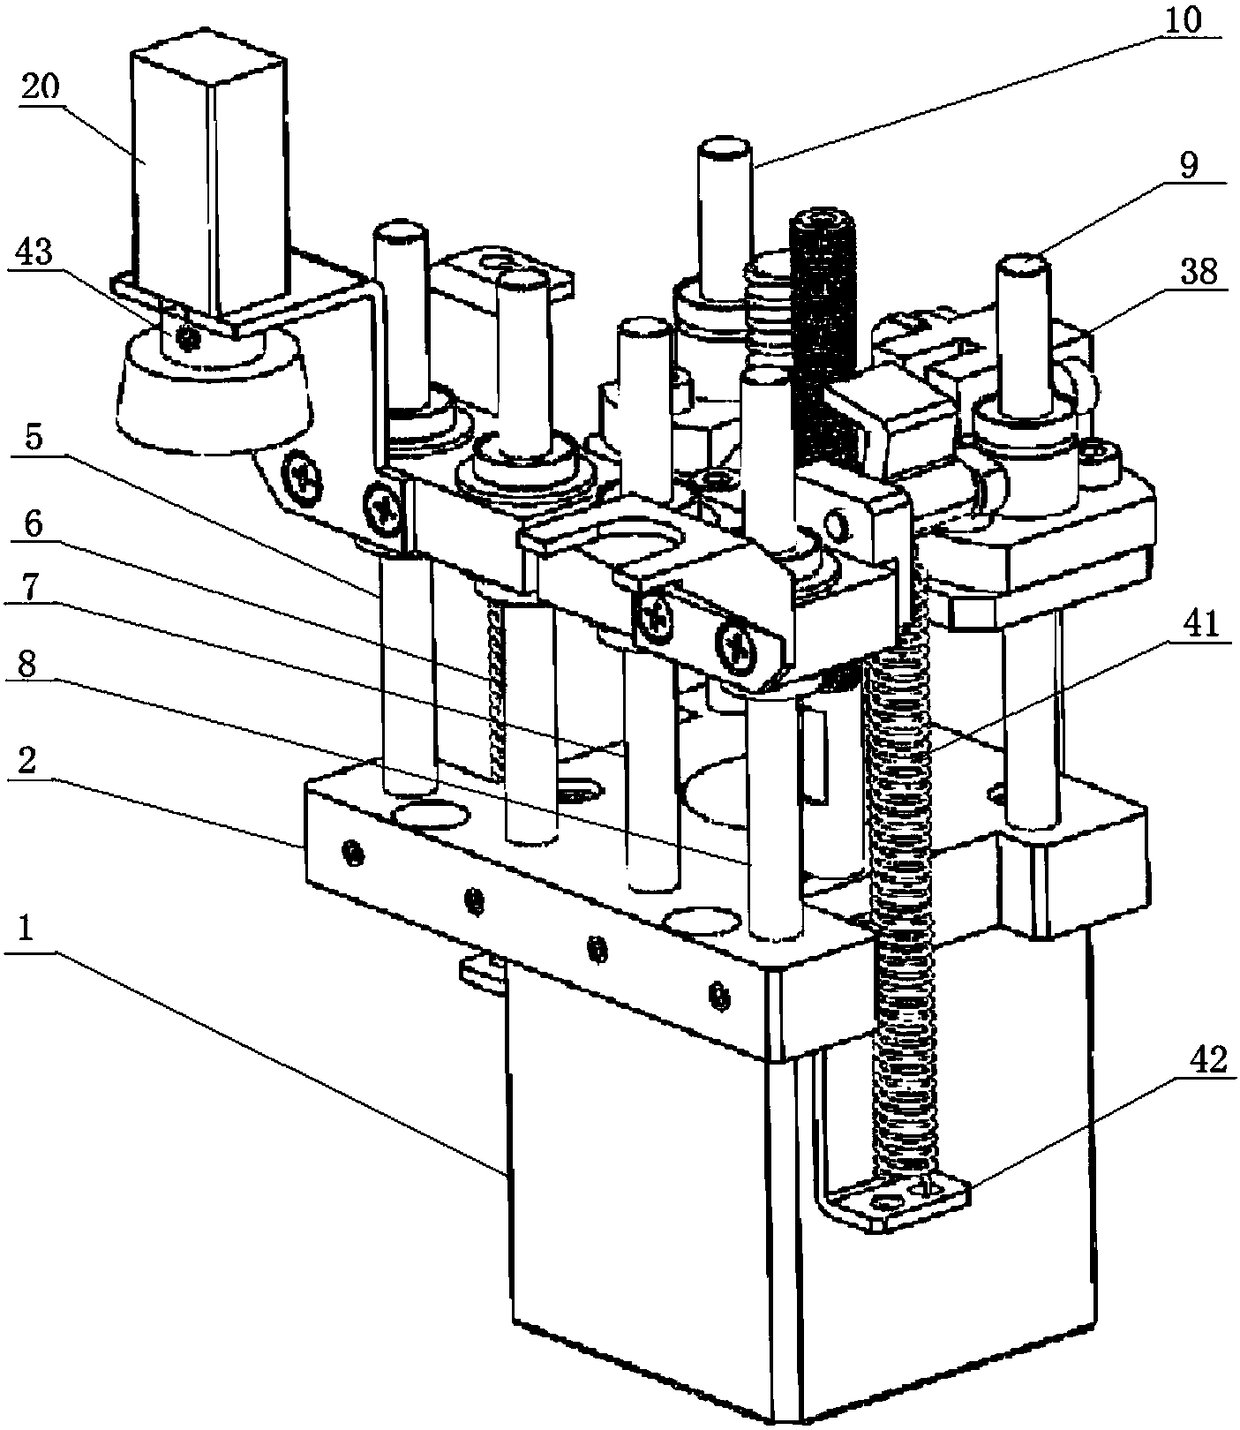 A blood collection tube rotary pressing device